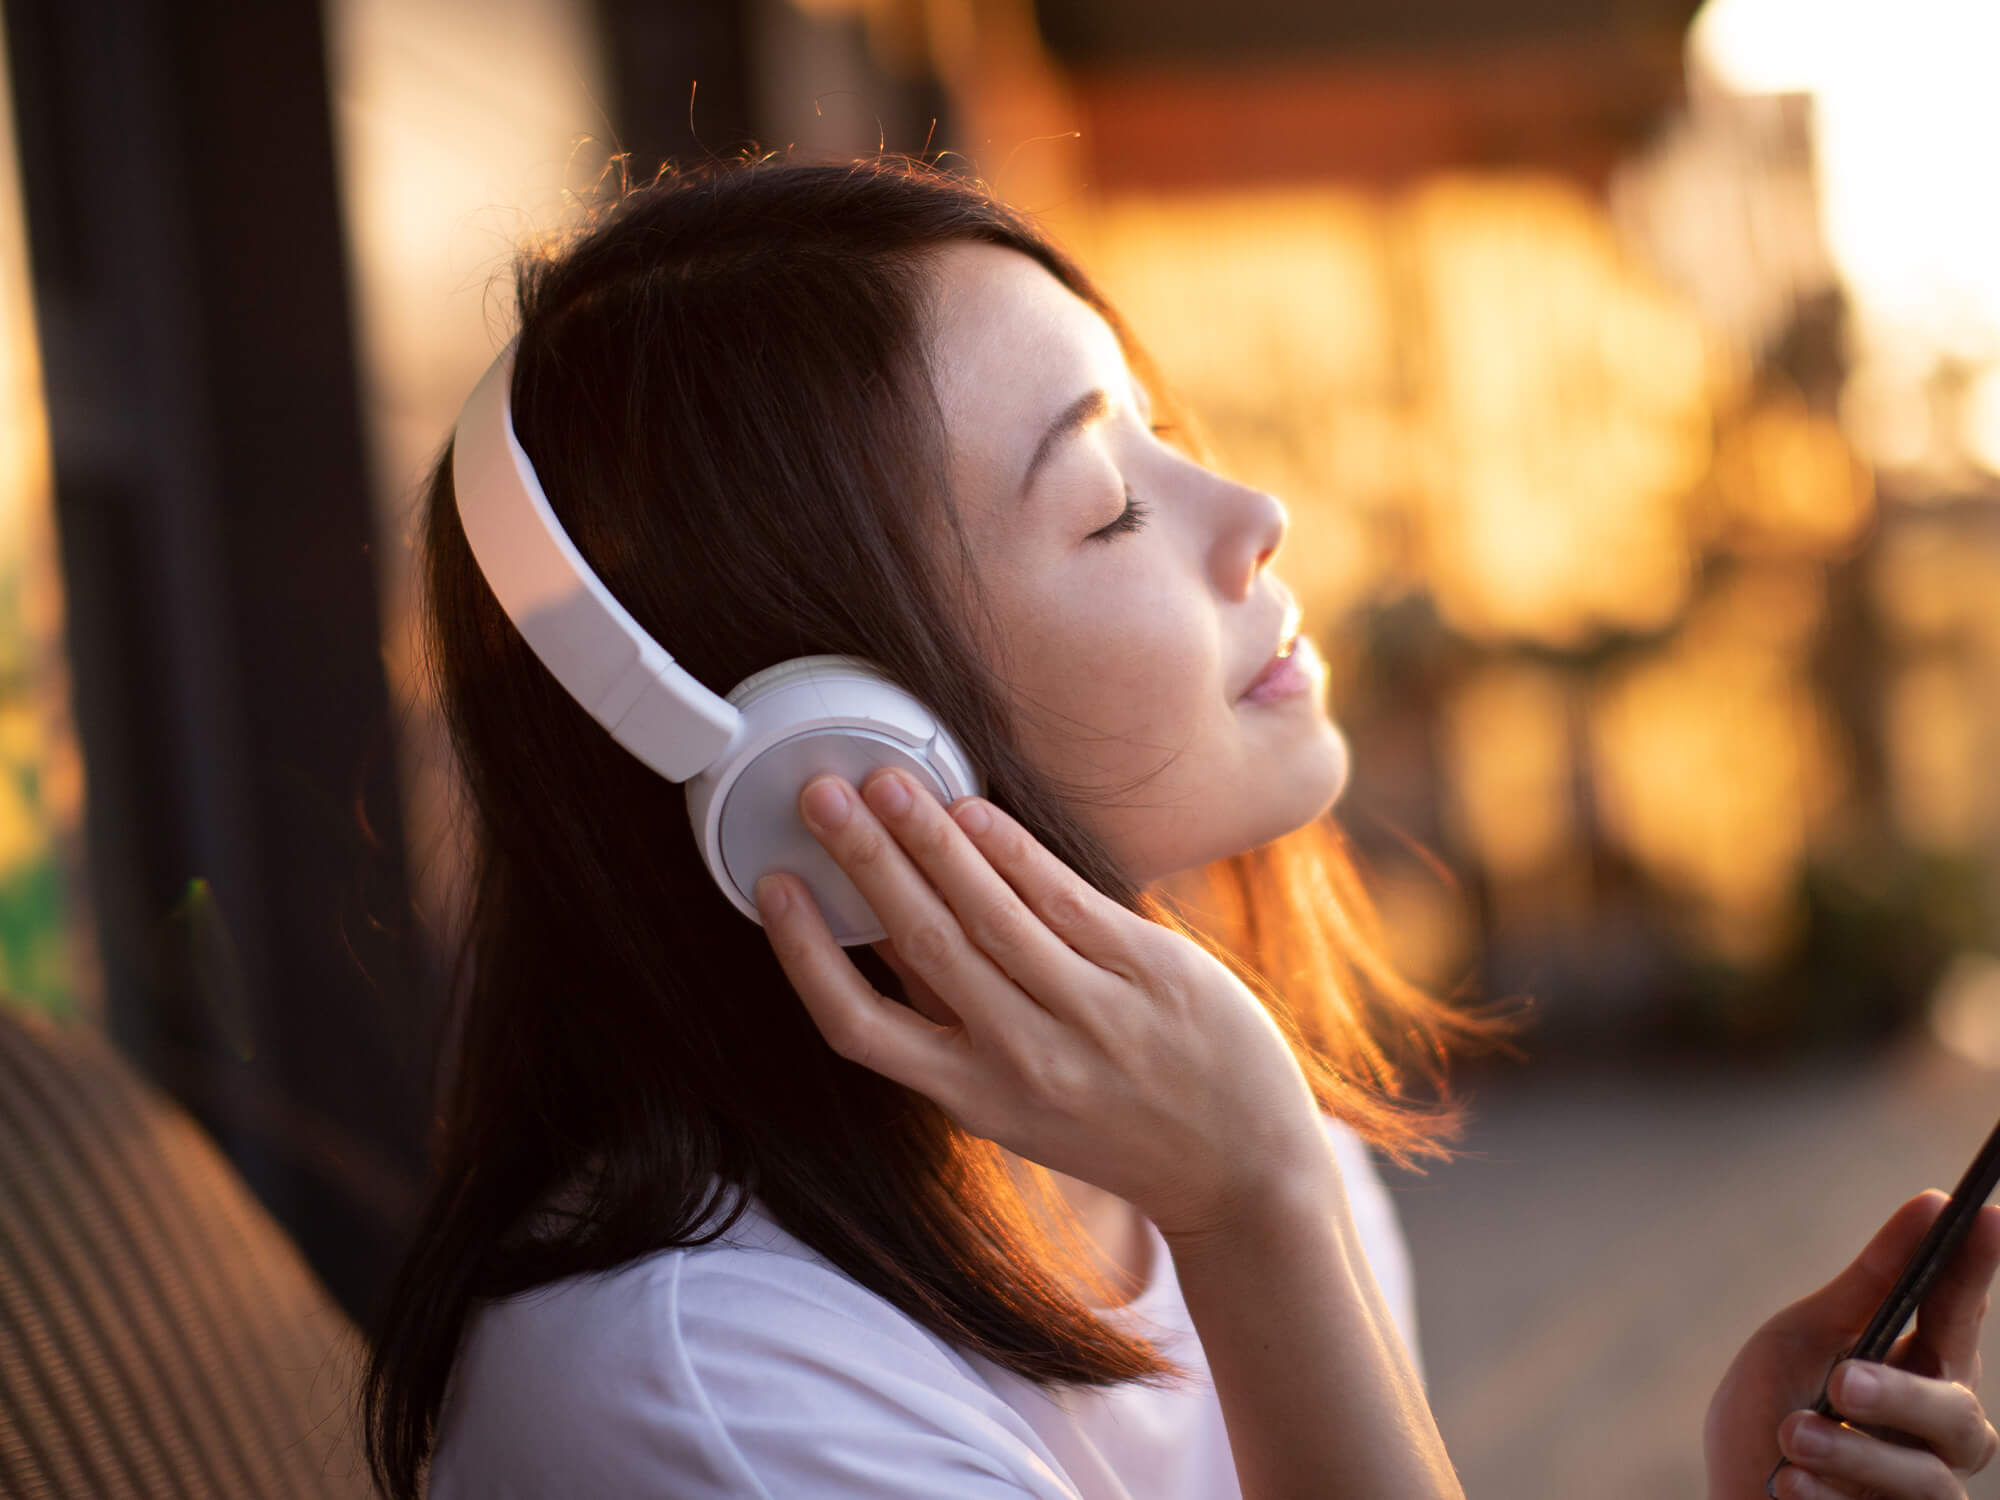 A woman wearing headphones and listening to music. She has her eyes closed and is slightly smiling as if relaxed.